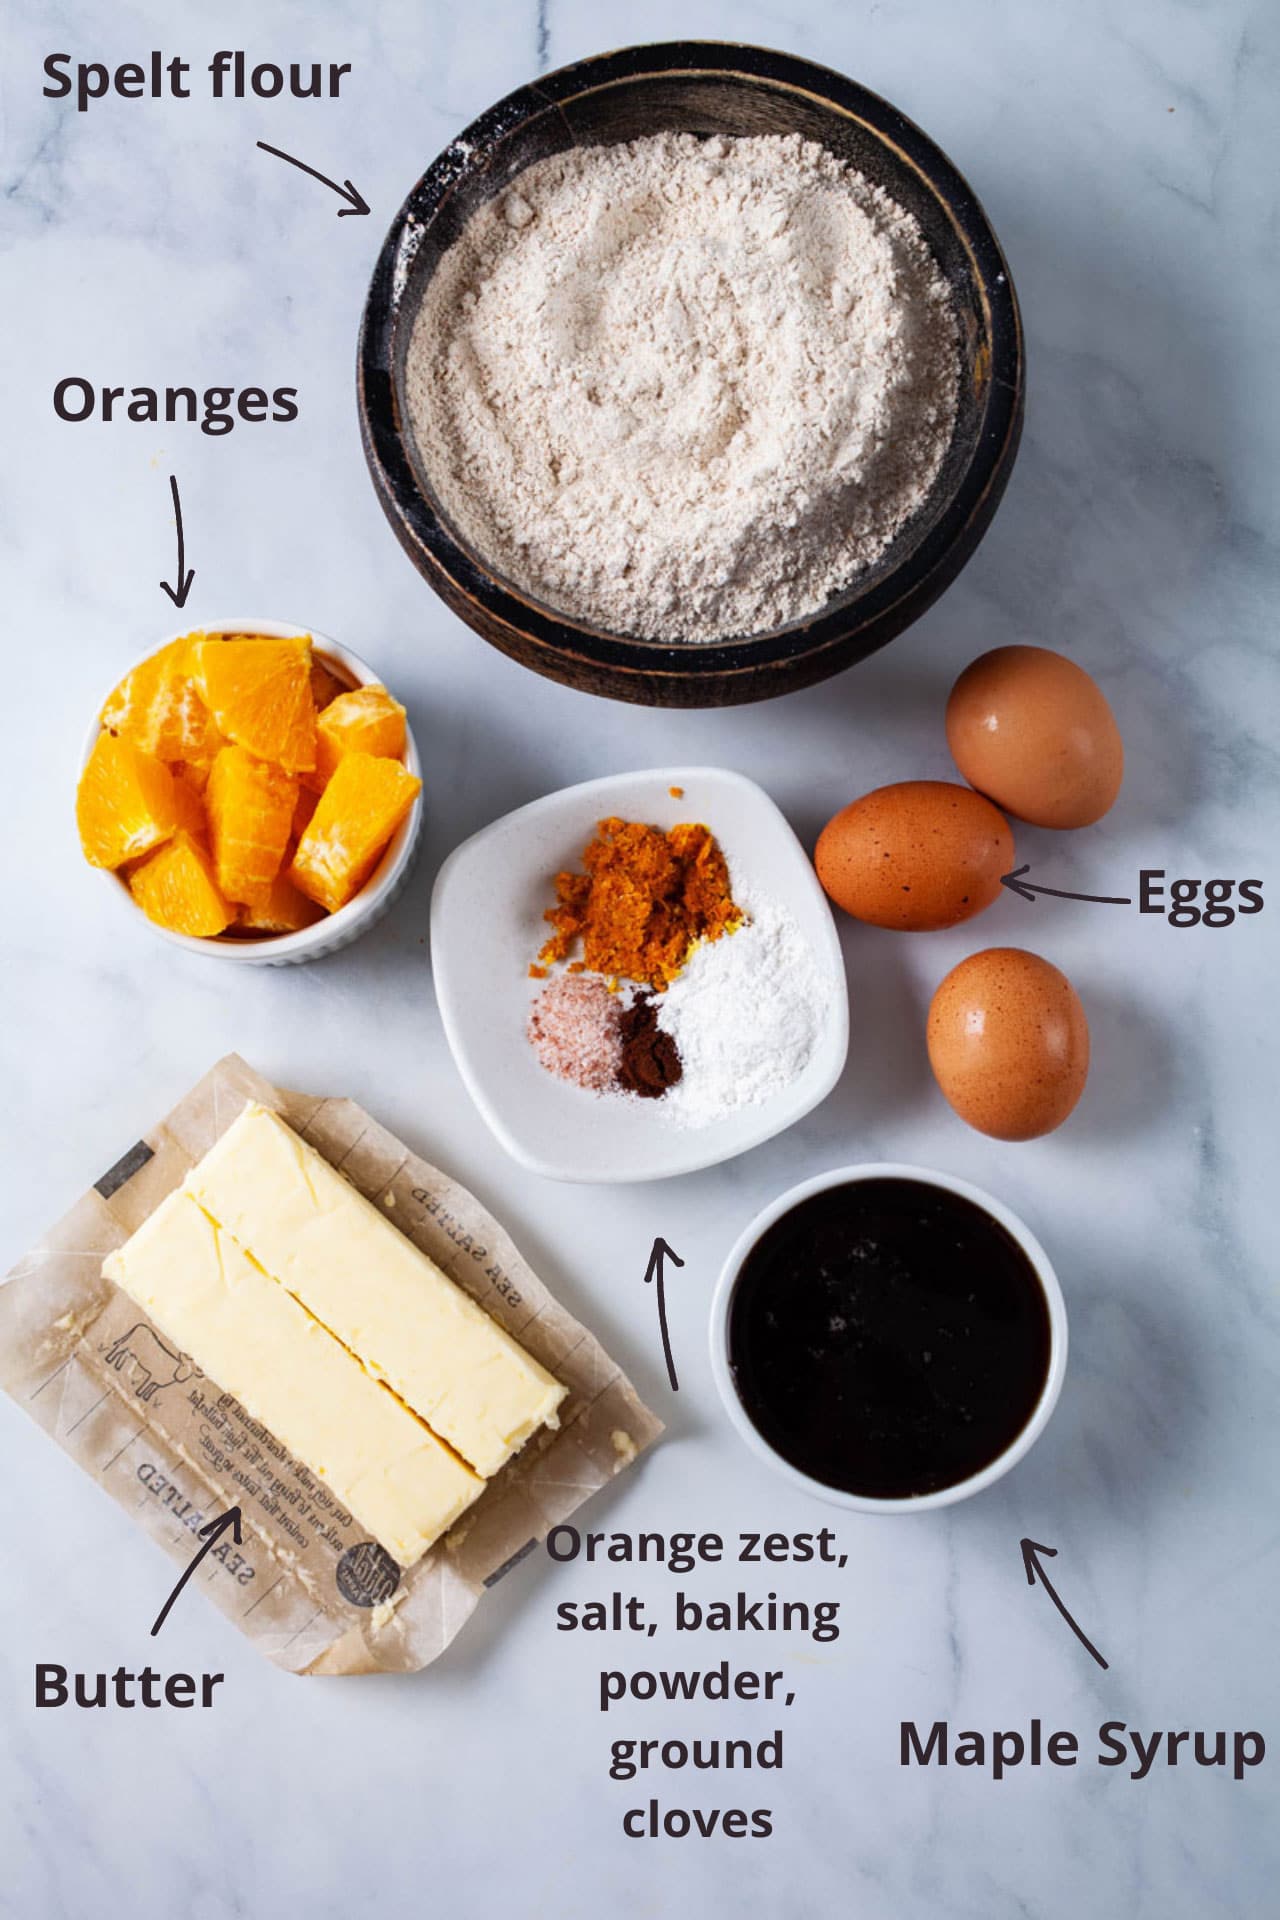 Ingredients like spelt flour, diced oranges, eggs, butter, maple syrup, orange zest, and spices displayed on a table.